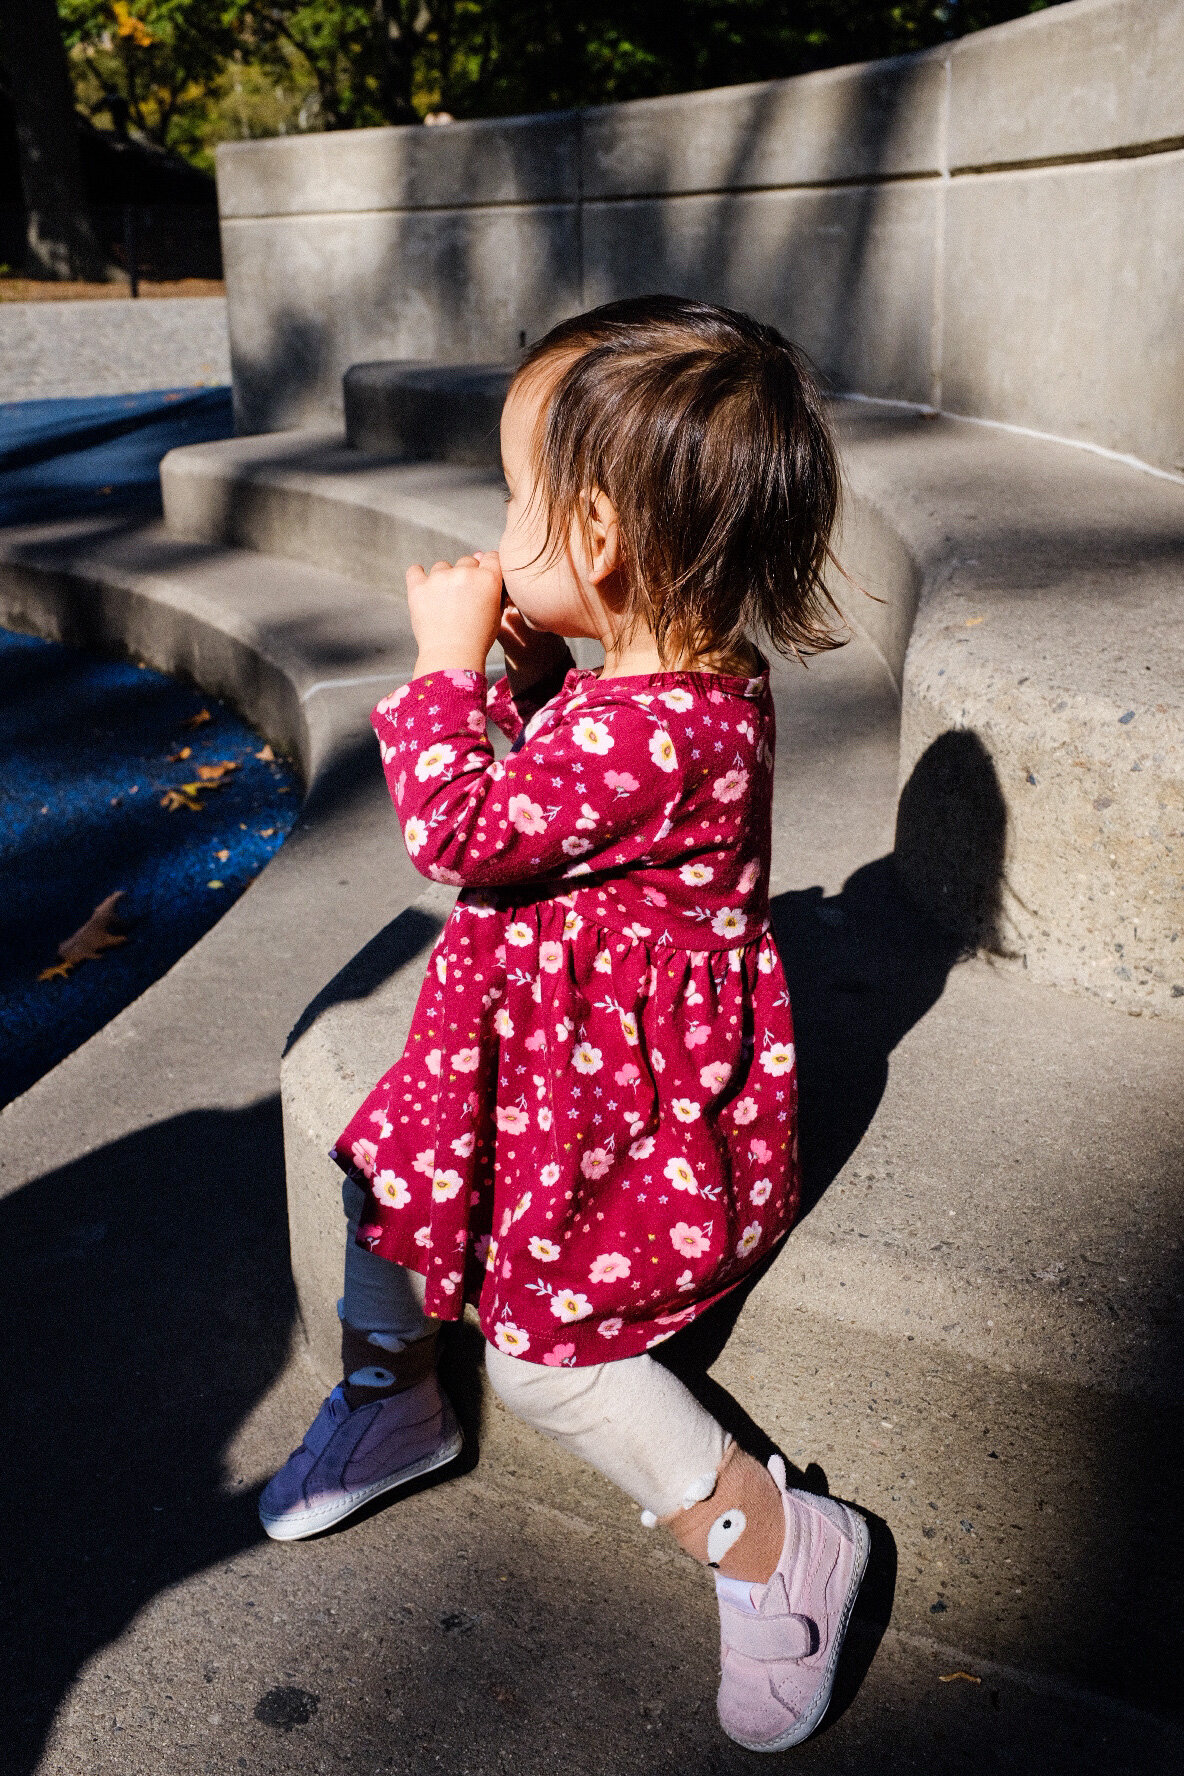  Ruby in Central Park, New York City 2019 